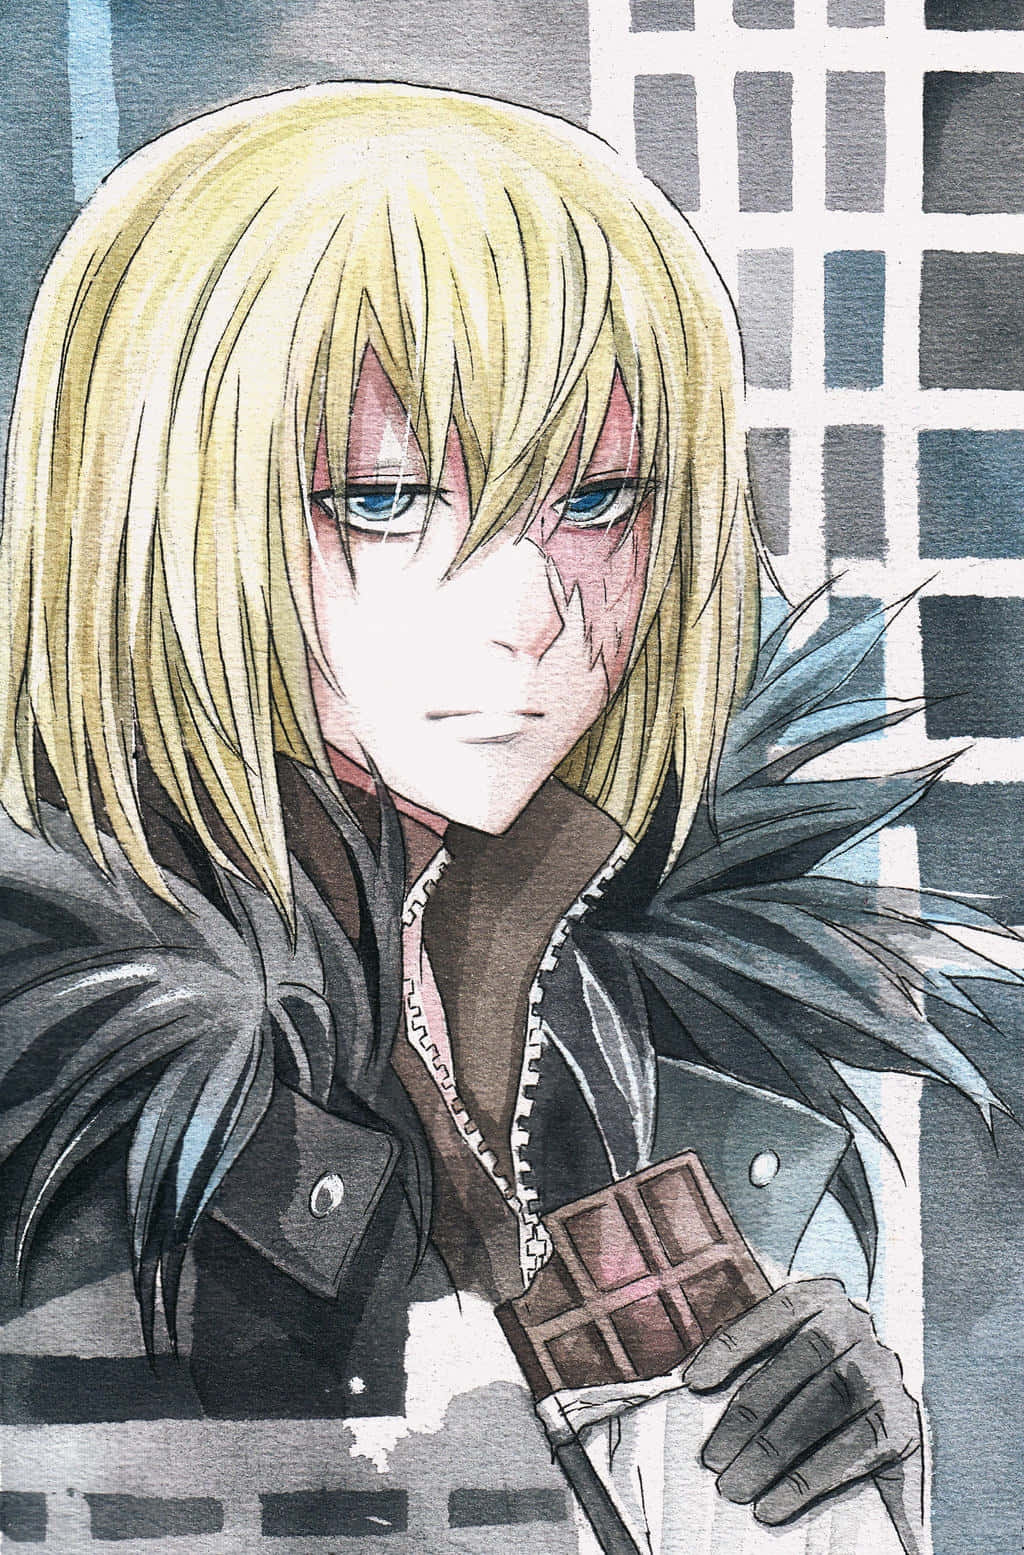 Mello from Death Note in a Thoughtful Pose Wallpaper